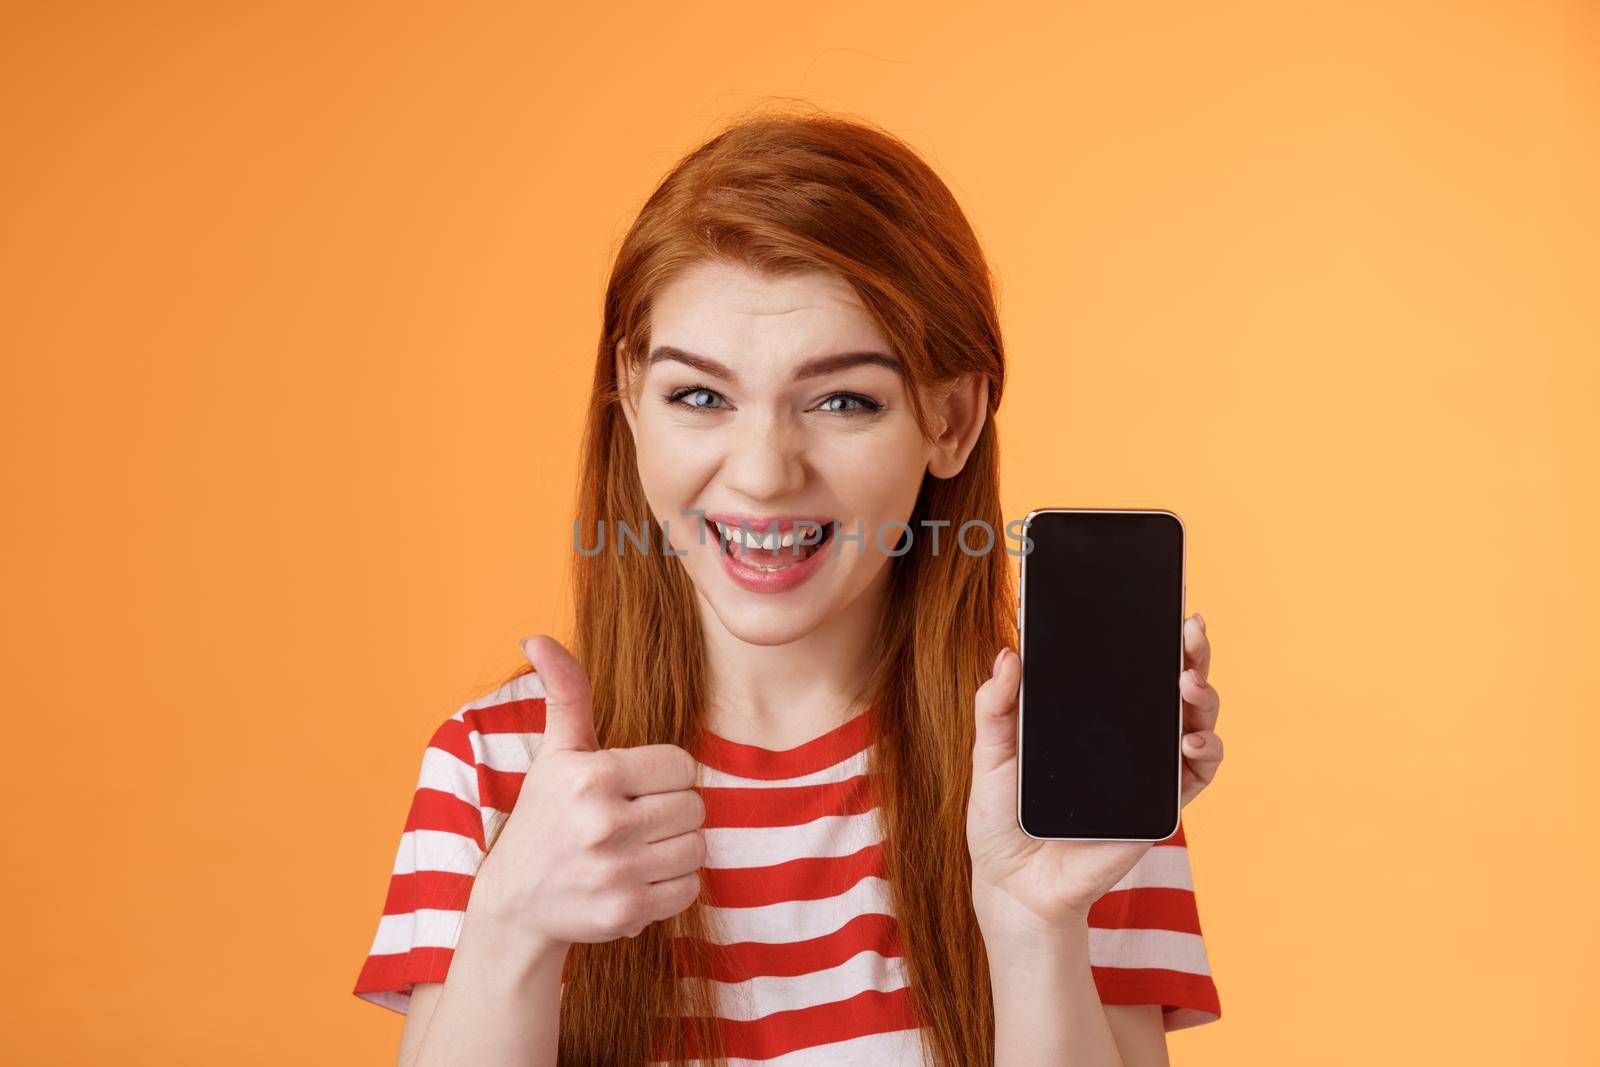 Cheerful assertive redhead woman recommend smartphone app, show phone display, thumb-up like approval sign, smiling broadly, suggest good online purchase, mobile advertisement. Copy space